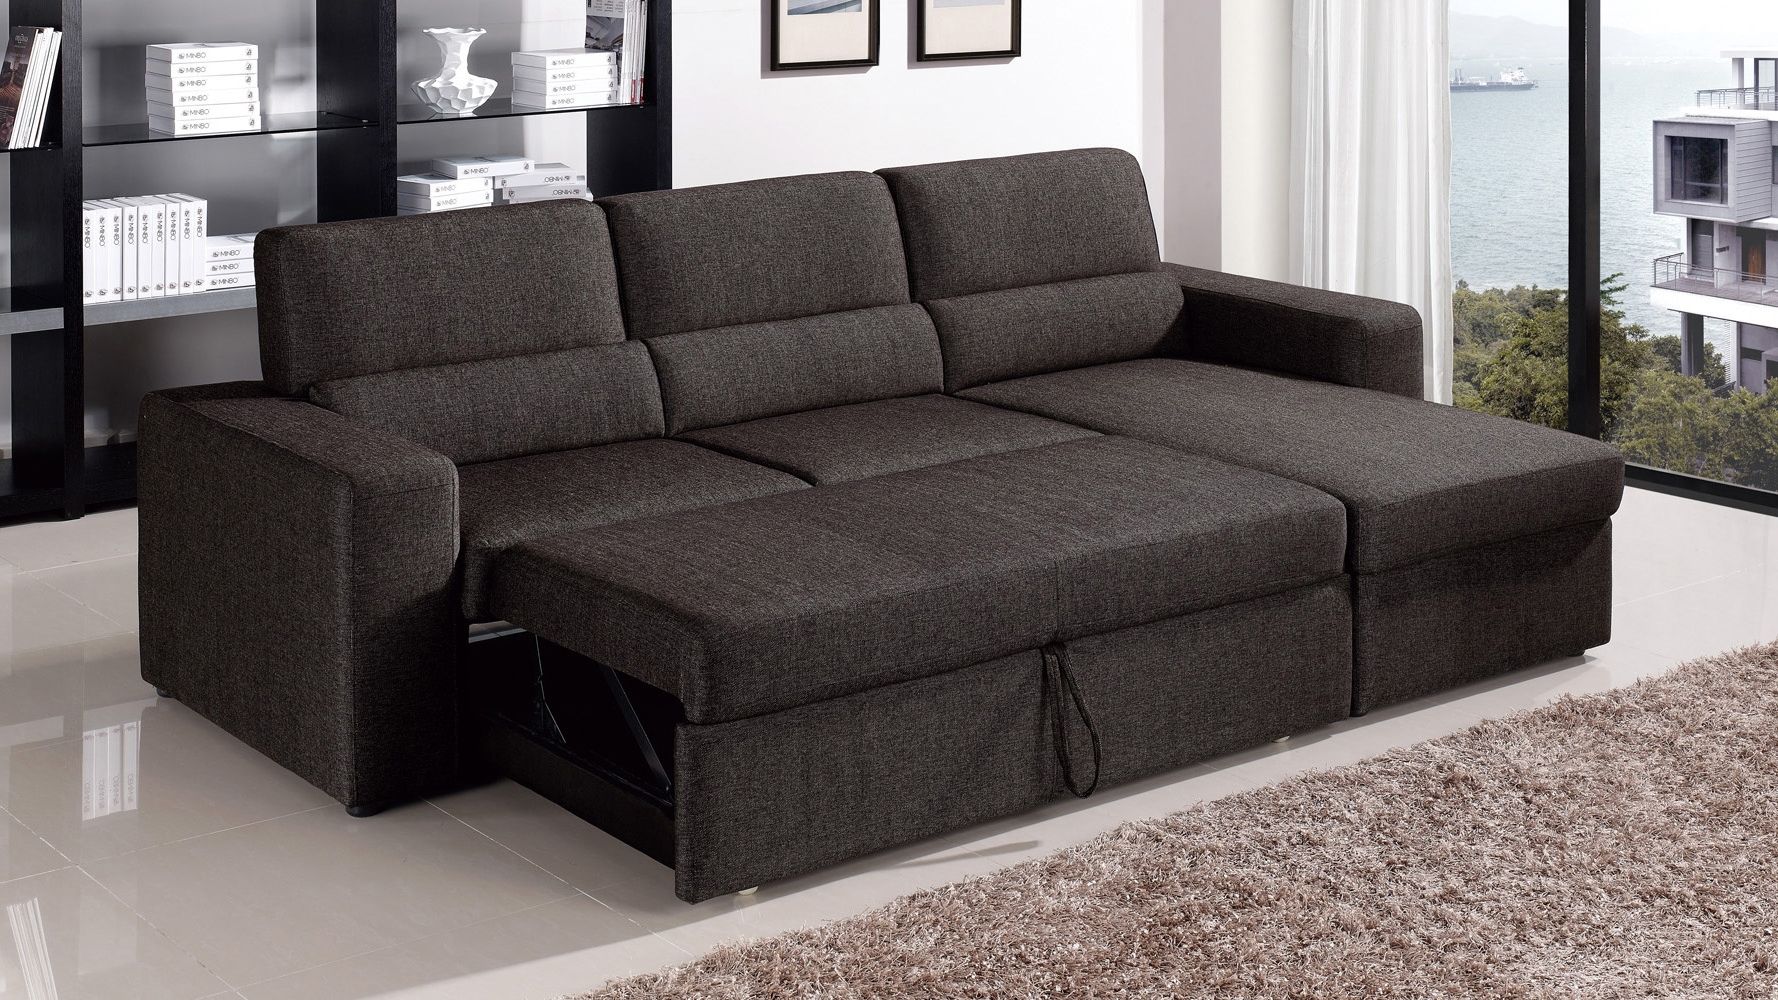 2018 Sleeper Sectional Sofas Within Black/brown Clubber Sleeper Sectional Sofa (View 1 of 20)